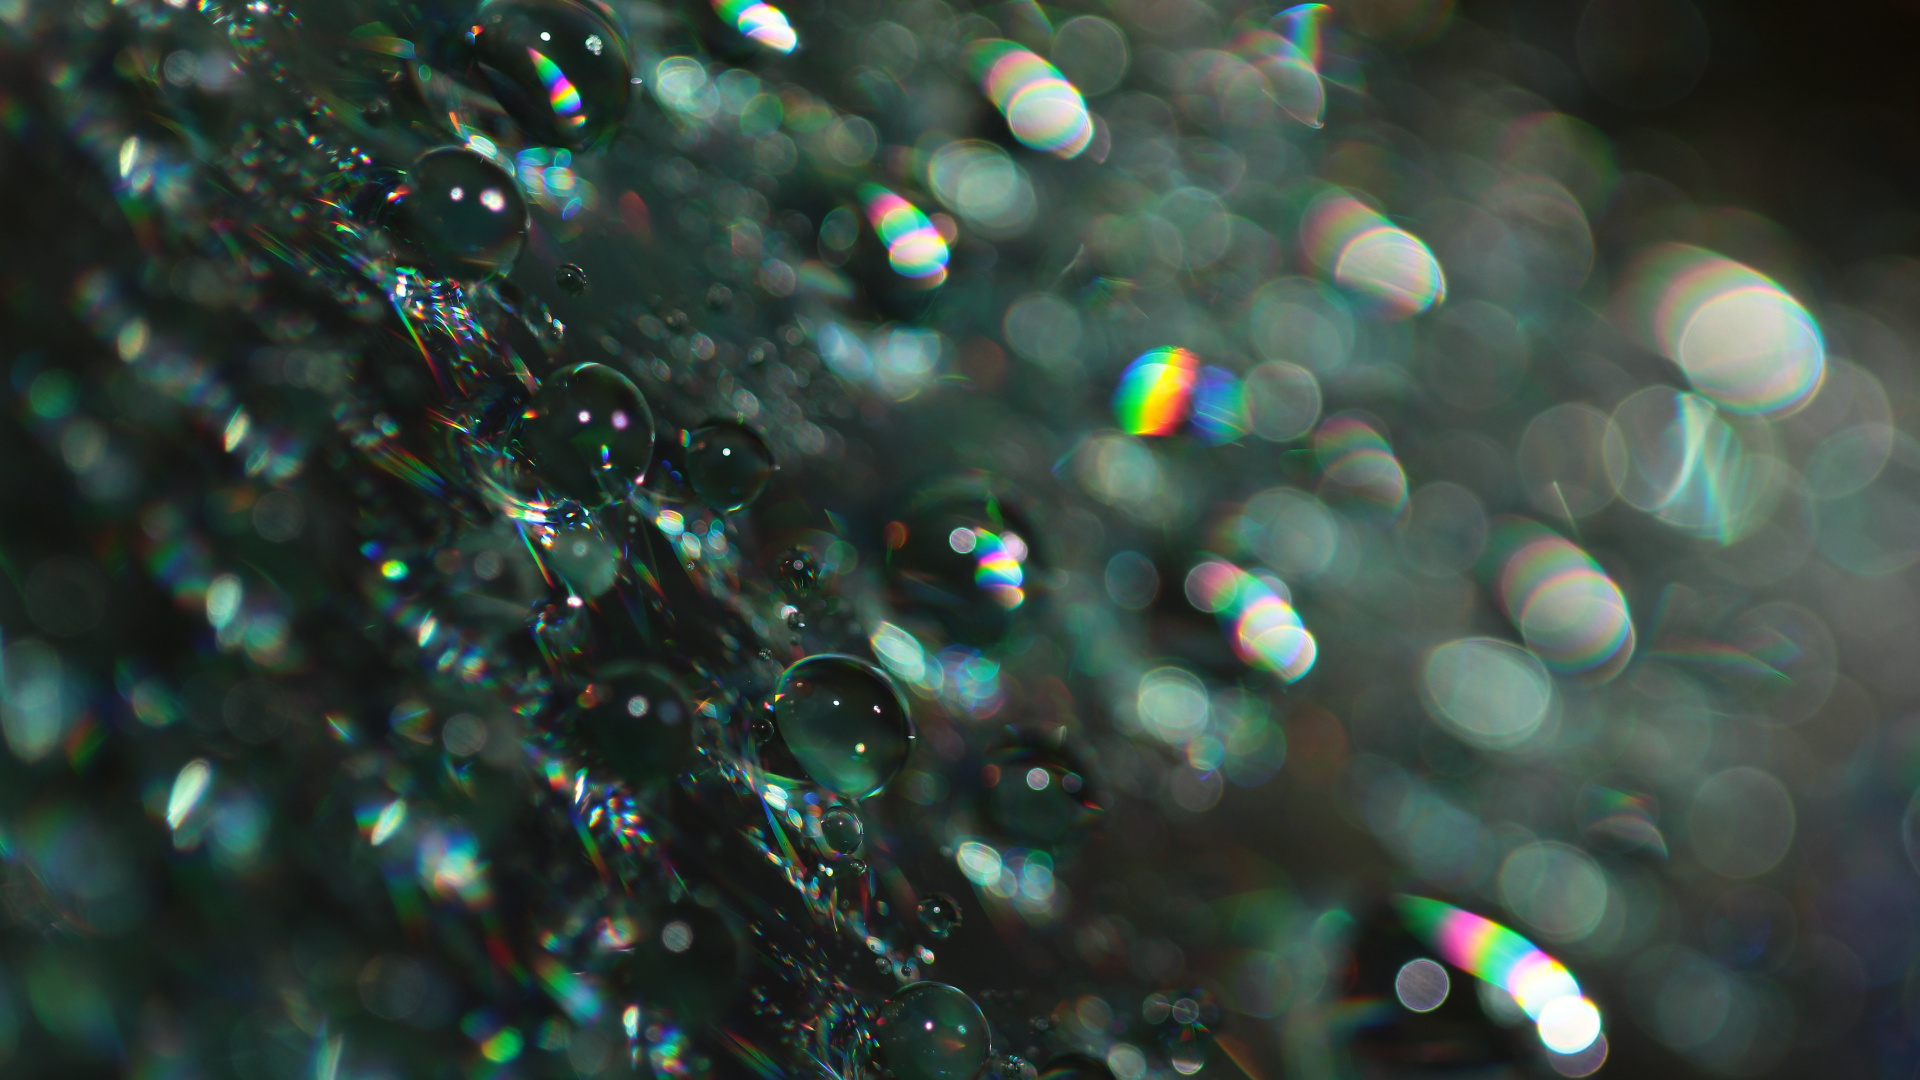 Water Droplets on Glass During Daytime. Wallpaper in 1920x1080 Resolution